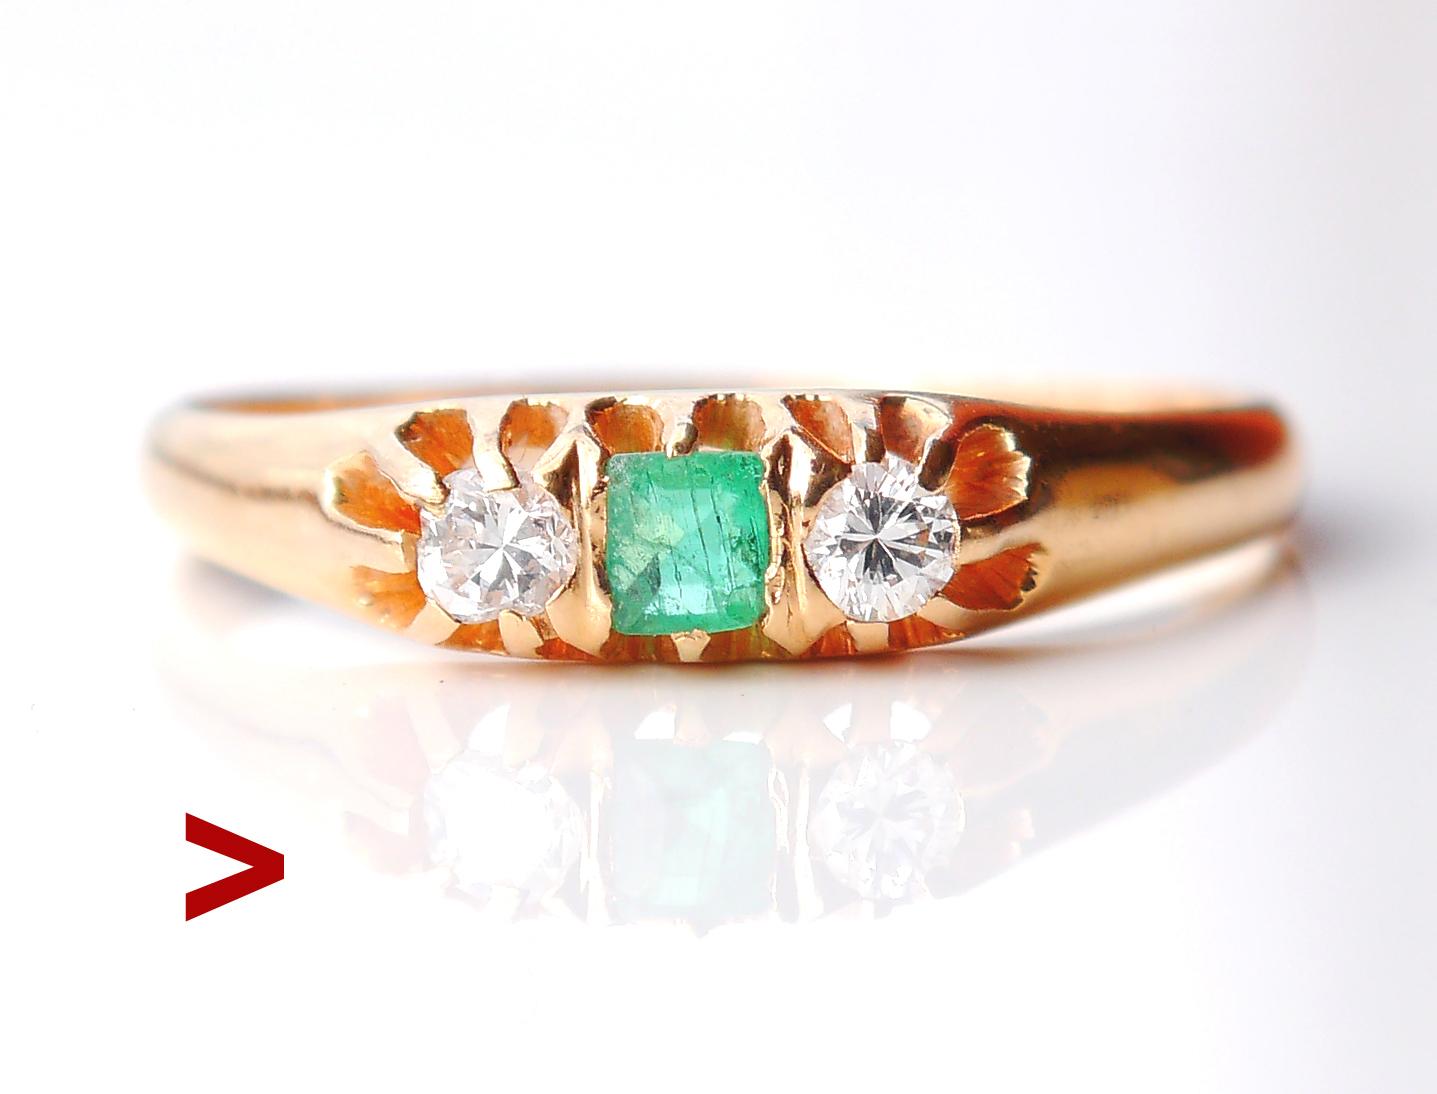 Emerald and Diamonds Ring made in 1928.

Band in solid 18ct Yellow Gold with claws holding natural 3.5 mm x 2.5 mm / ca.0.15 ct Emerald stone accented two diamonds of irregular old diamond cut Ø 2.5 mm each / 0.06 ct each, color ca. G,H/VS. All